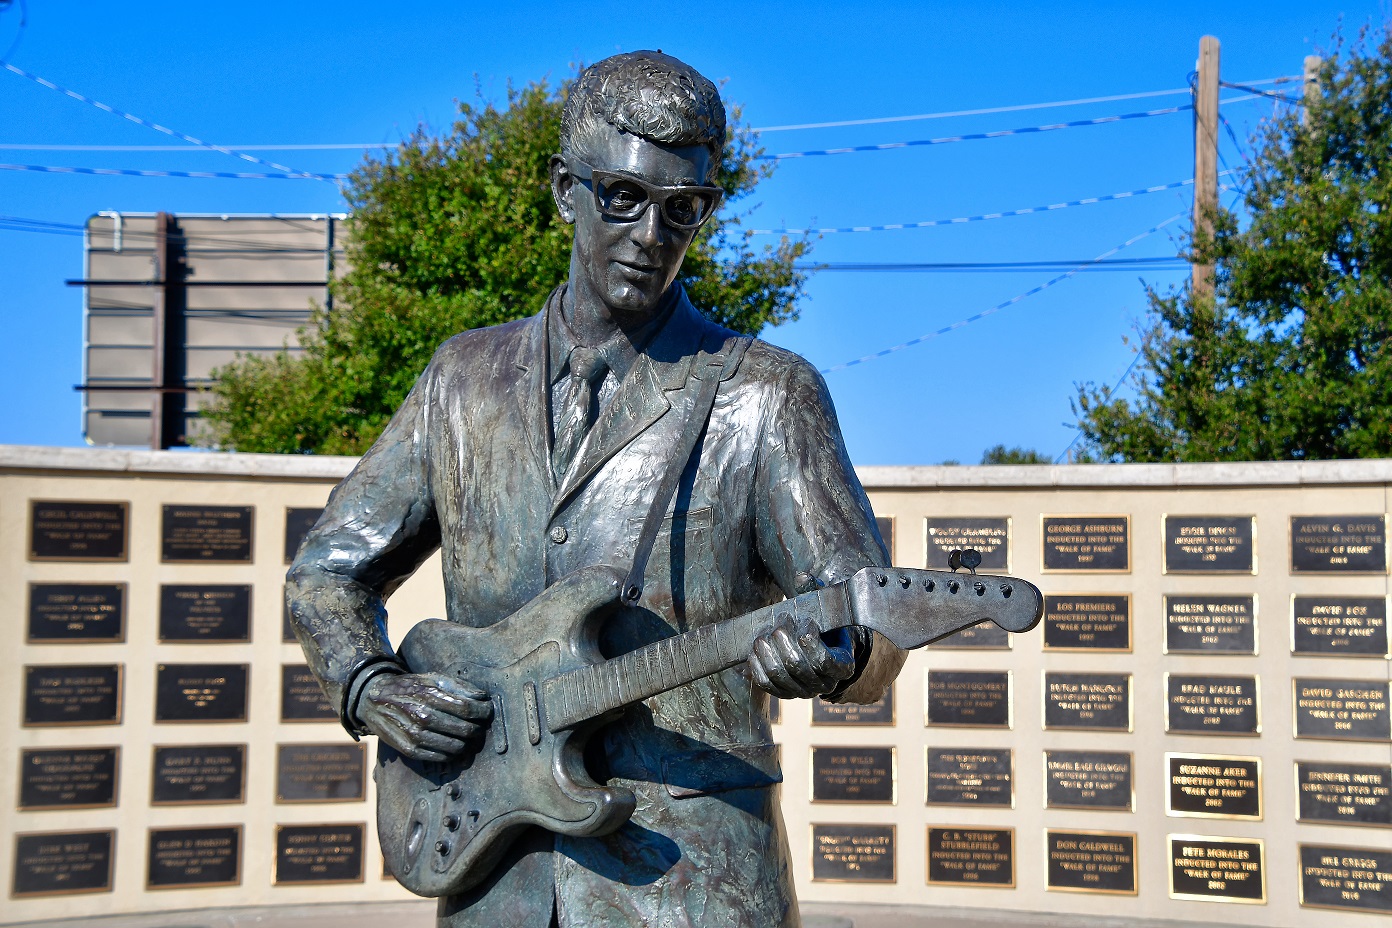 Statue of Buddy Holly in Lubbock Texas